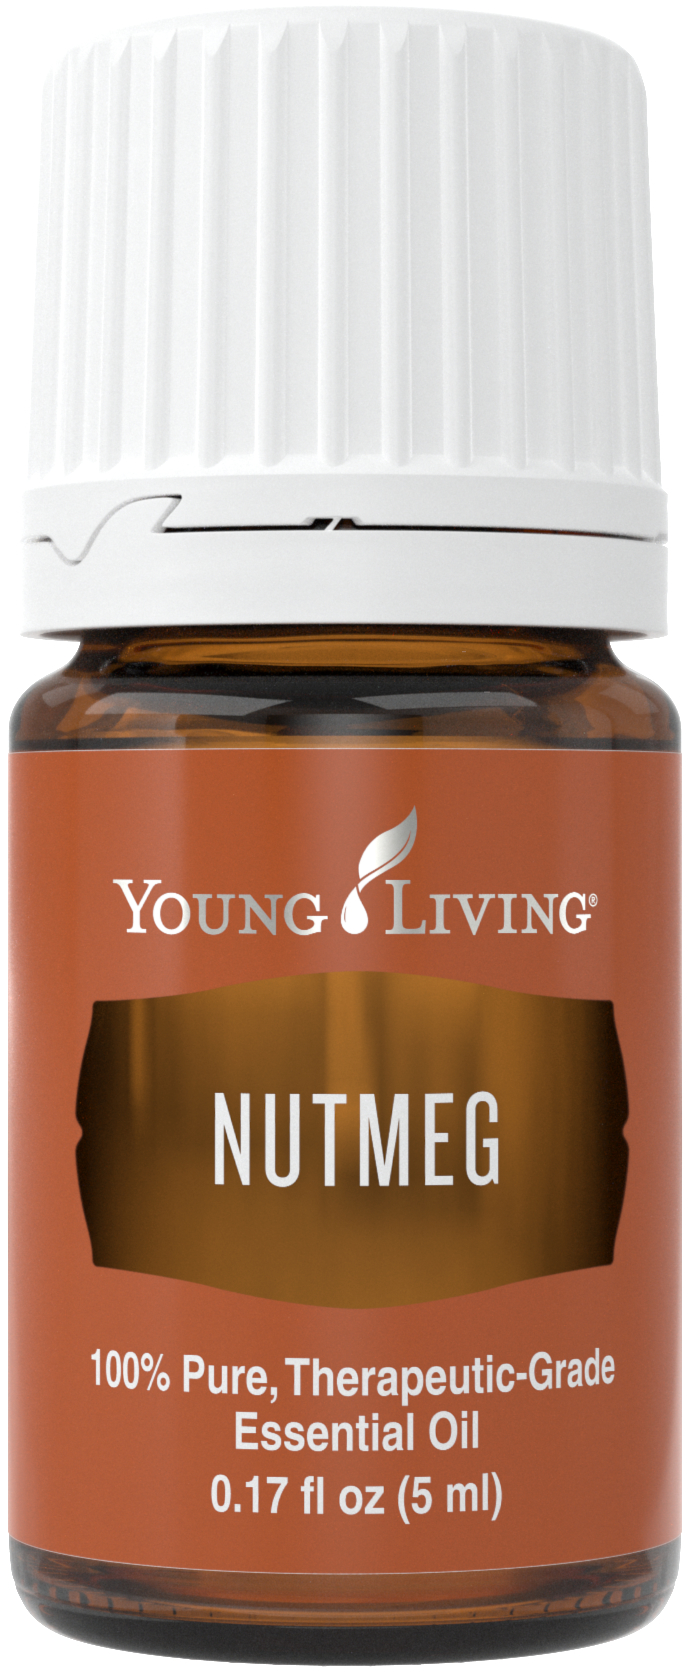 Nutmeg essential oil uses and benefits 